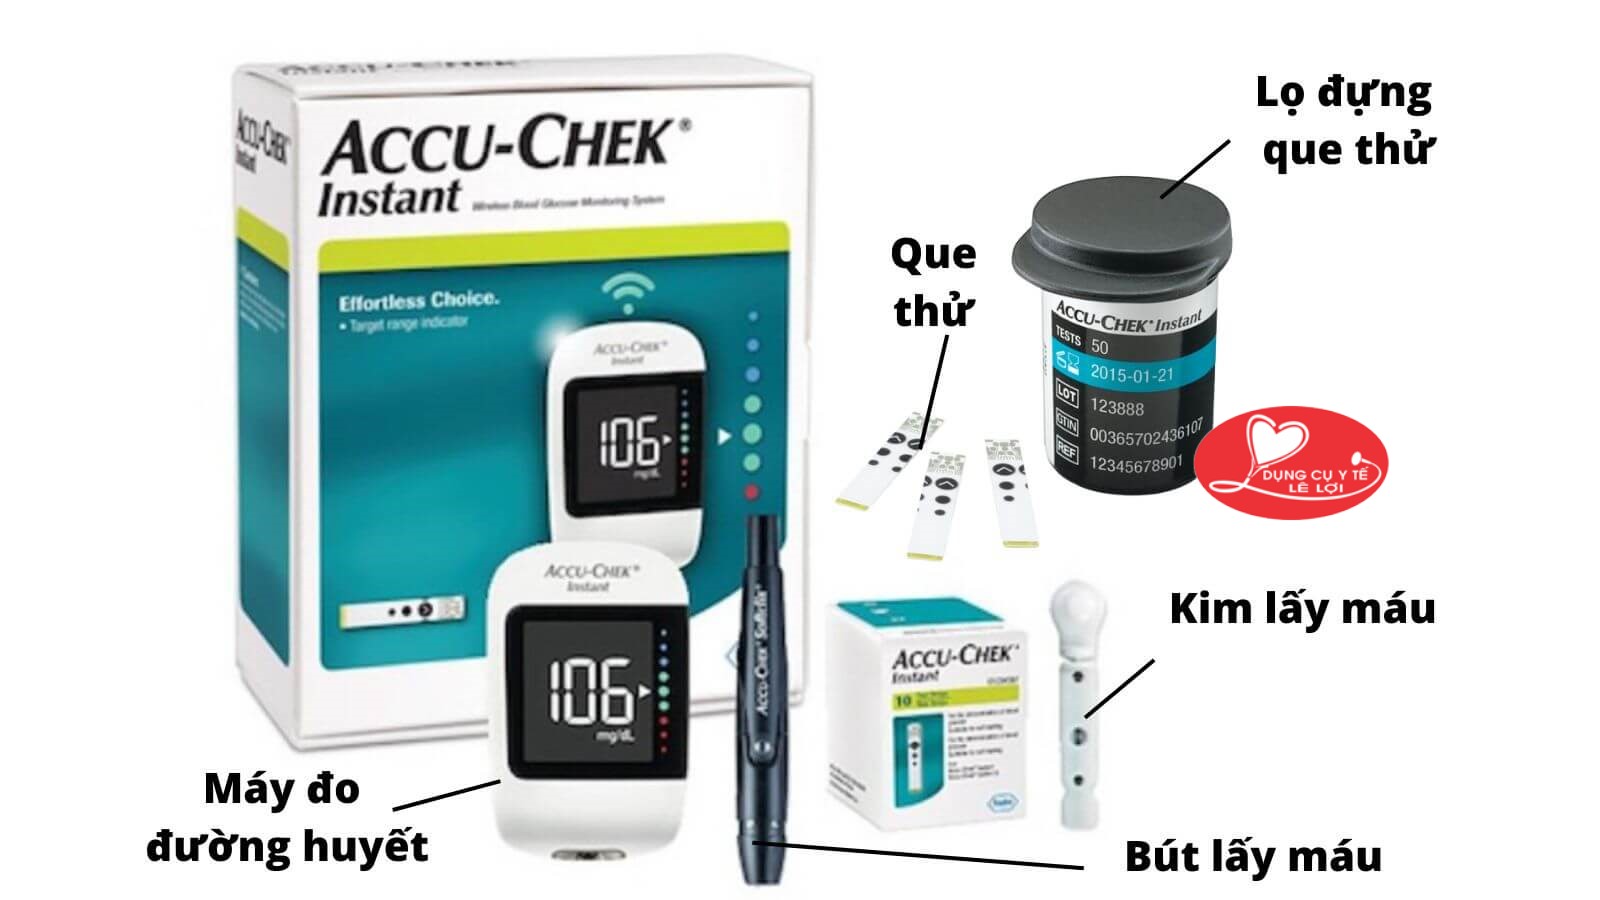 24-may-do-duong-huyet-accu-chek-instant-